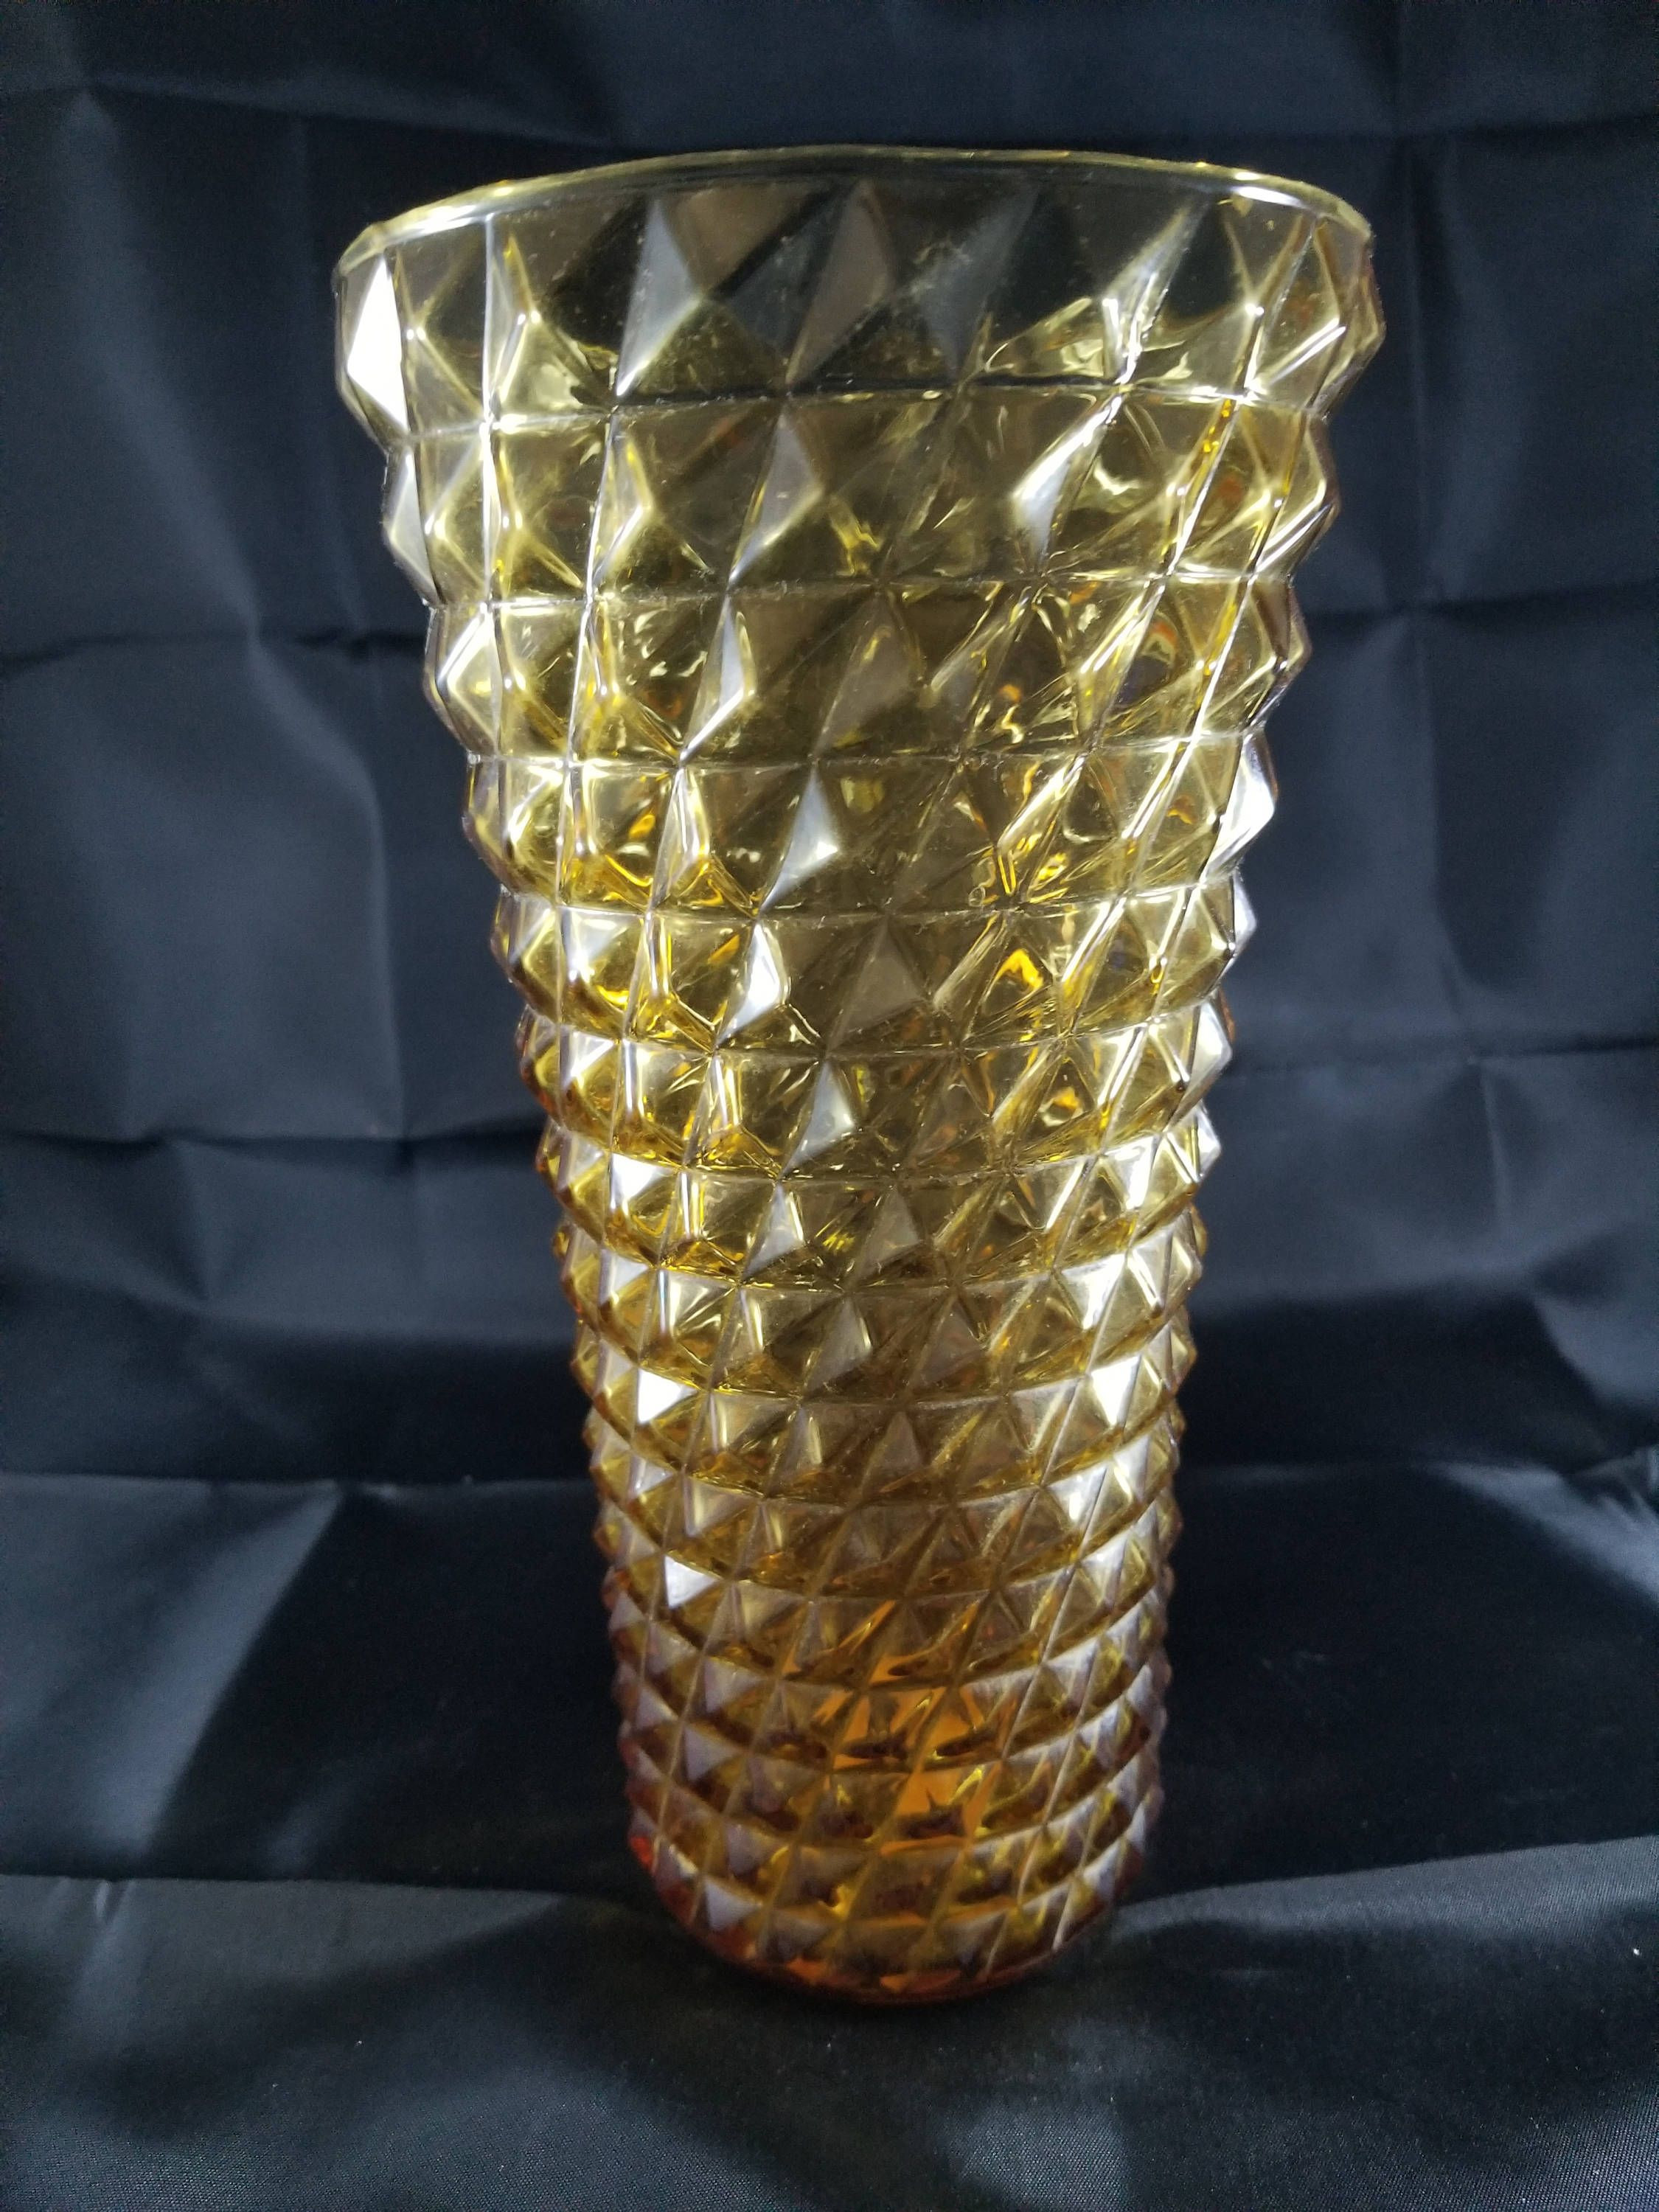 18 Nice Wide Cylinder Vases Cheap 2024 free download wide cylinder vases cheap of large rare vintage rossini genuine empoli glass amber hobnail italy within large rare vintage rossini genuine empoli glass amber hobnail italy 9 75tall 5 50 wide